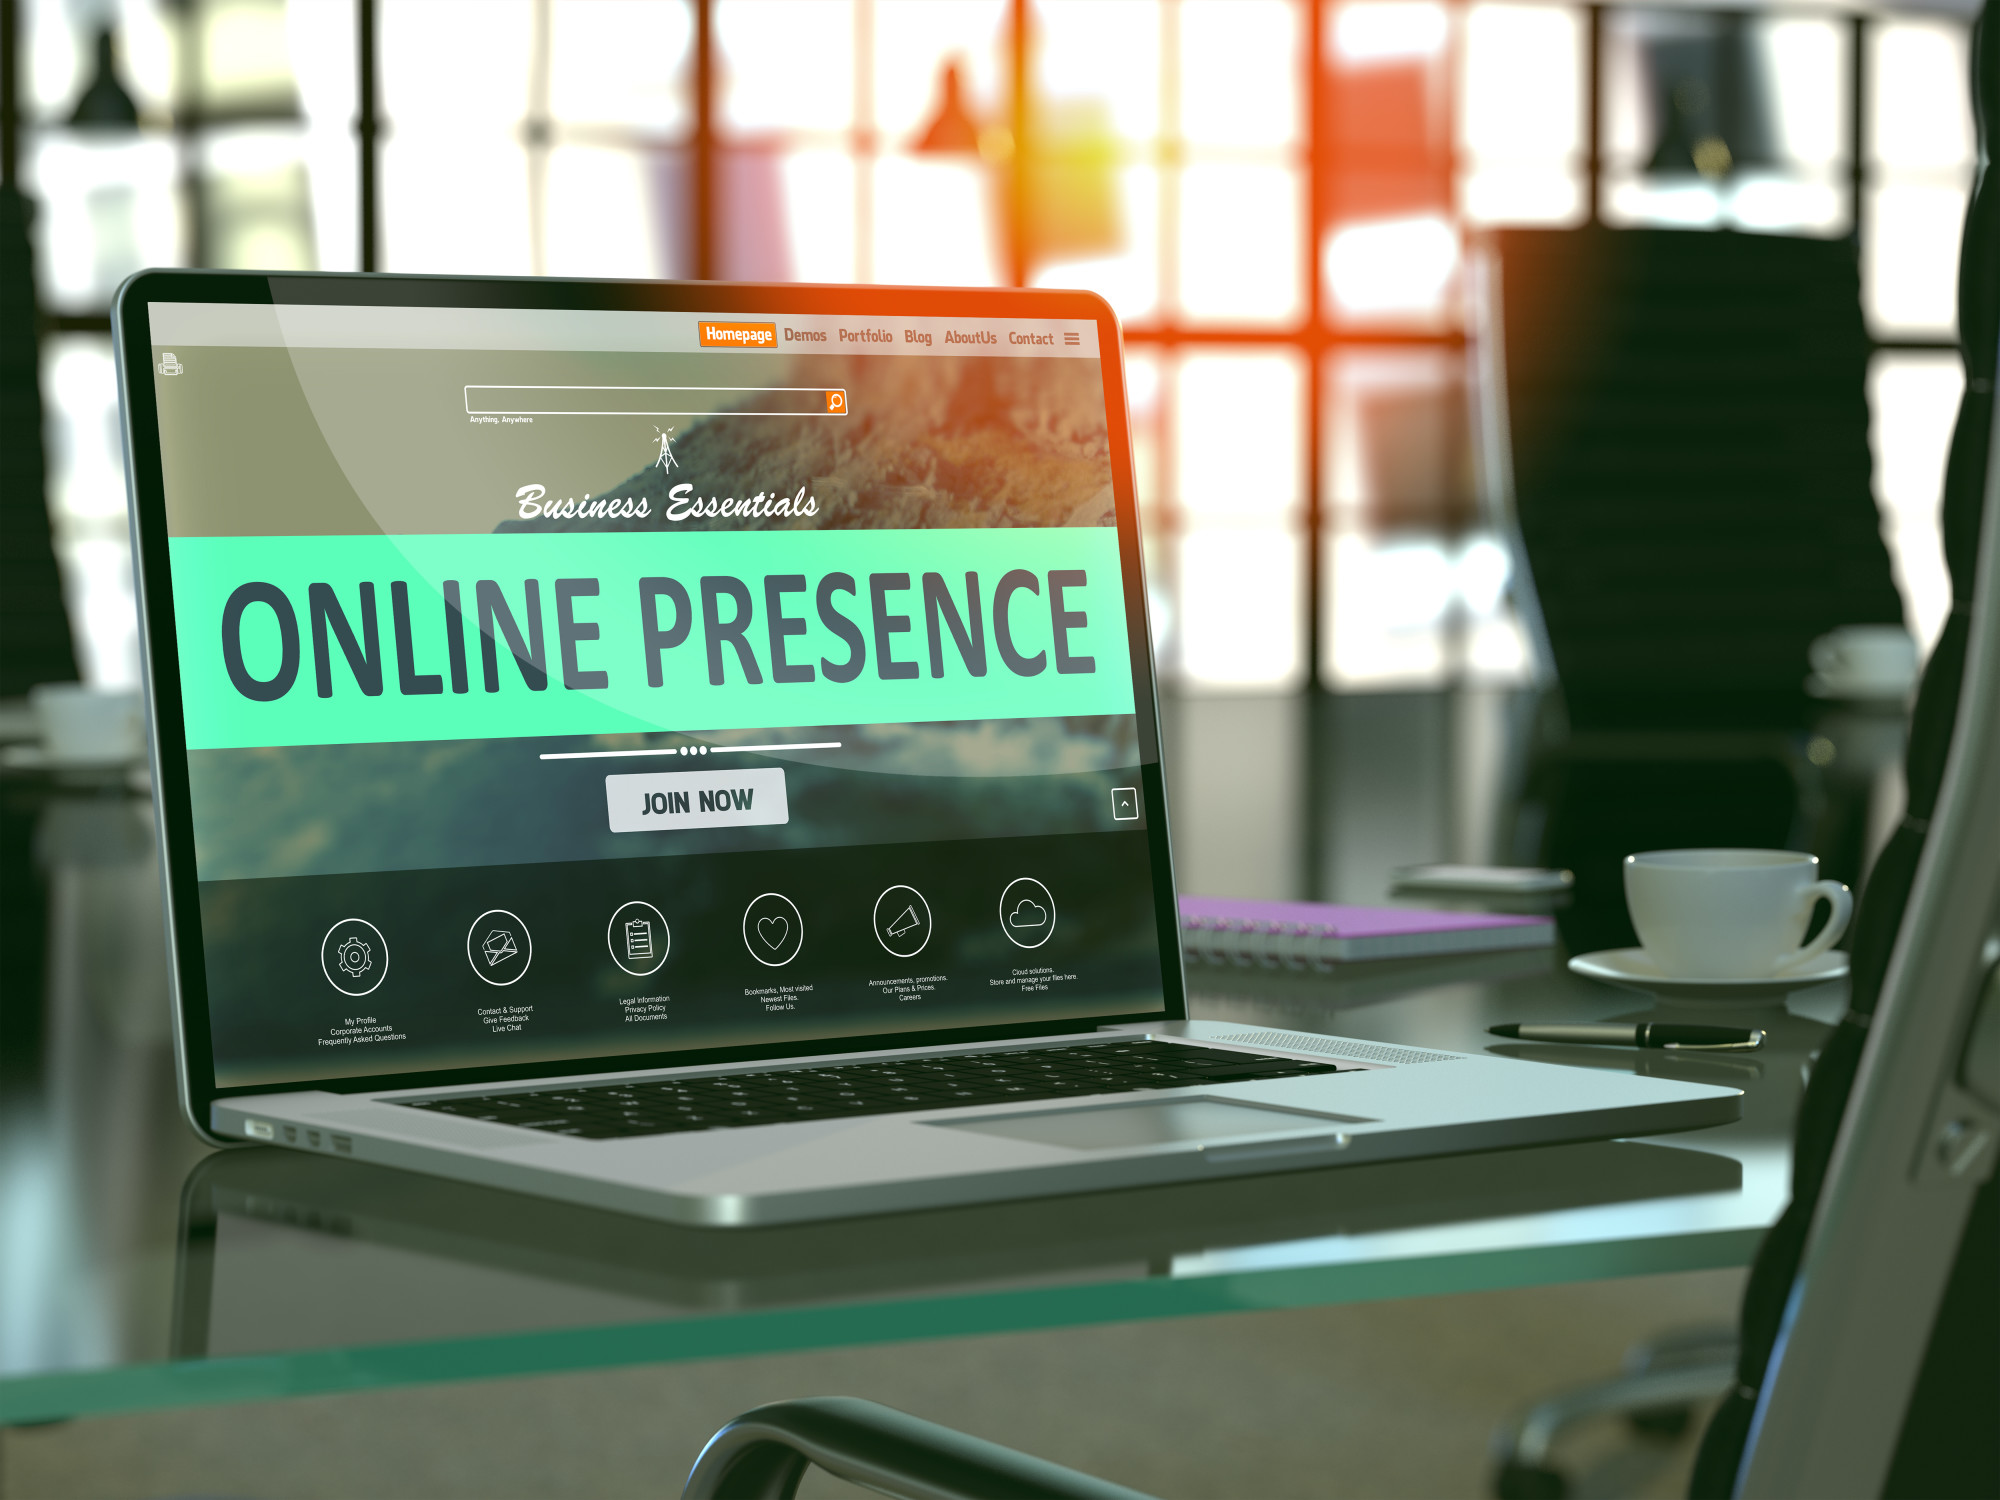 A Quick Guide on How to Improve Your Company’s Online Presence